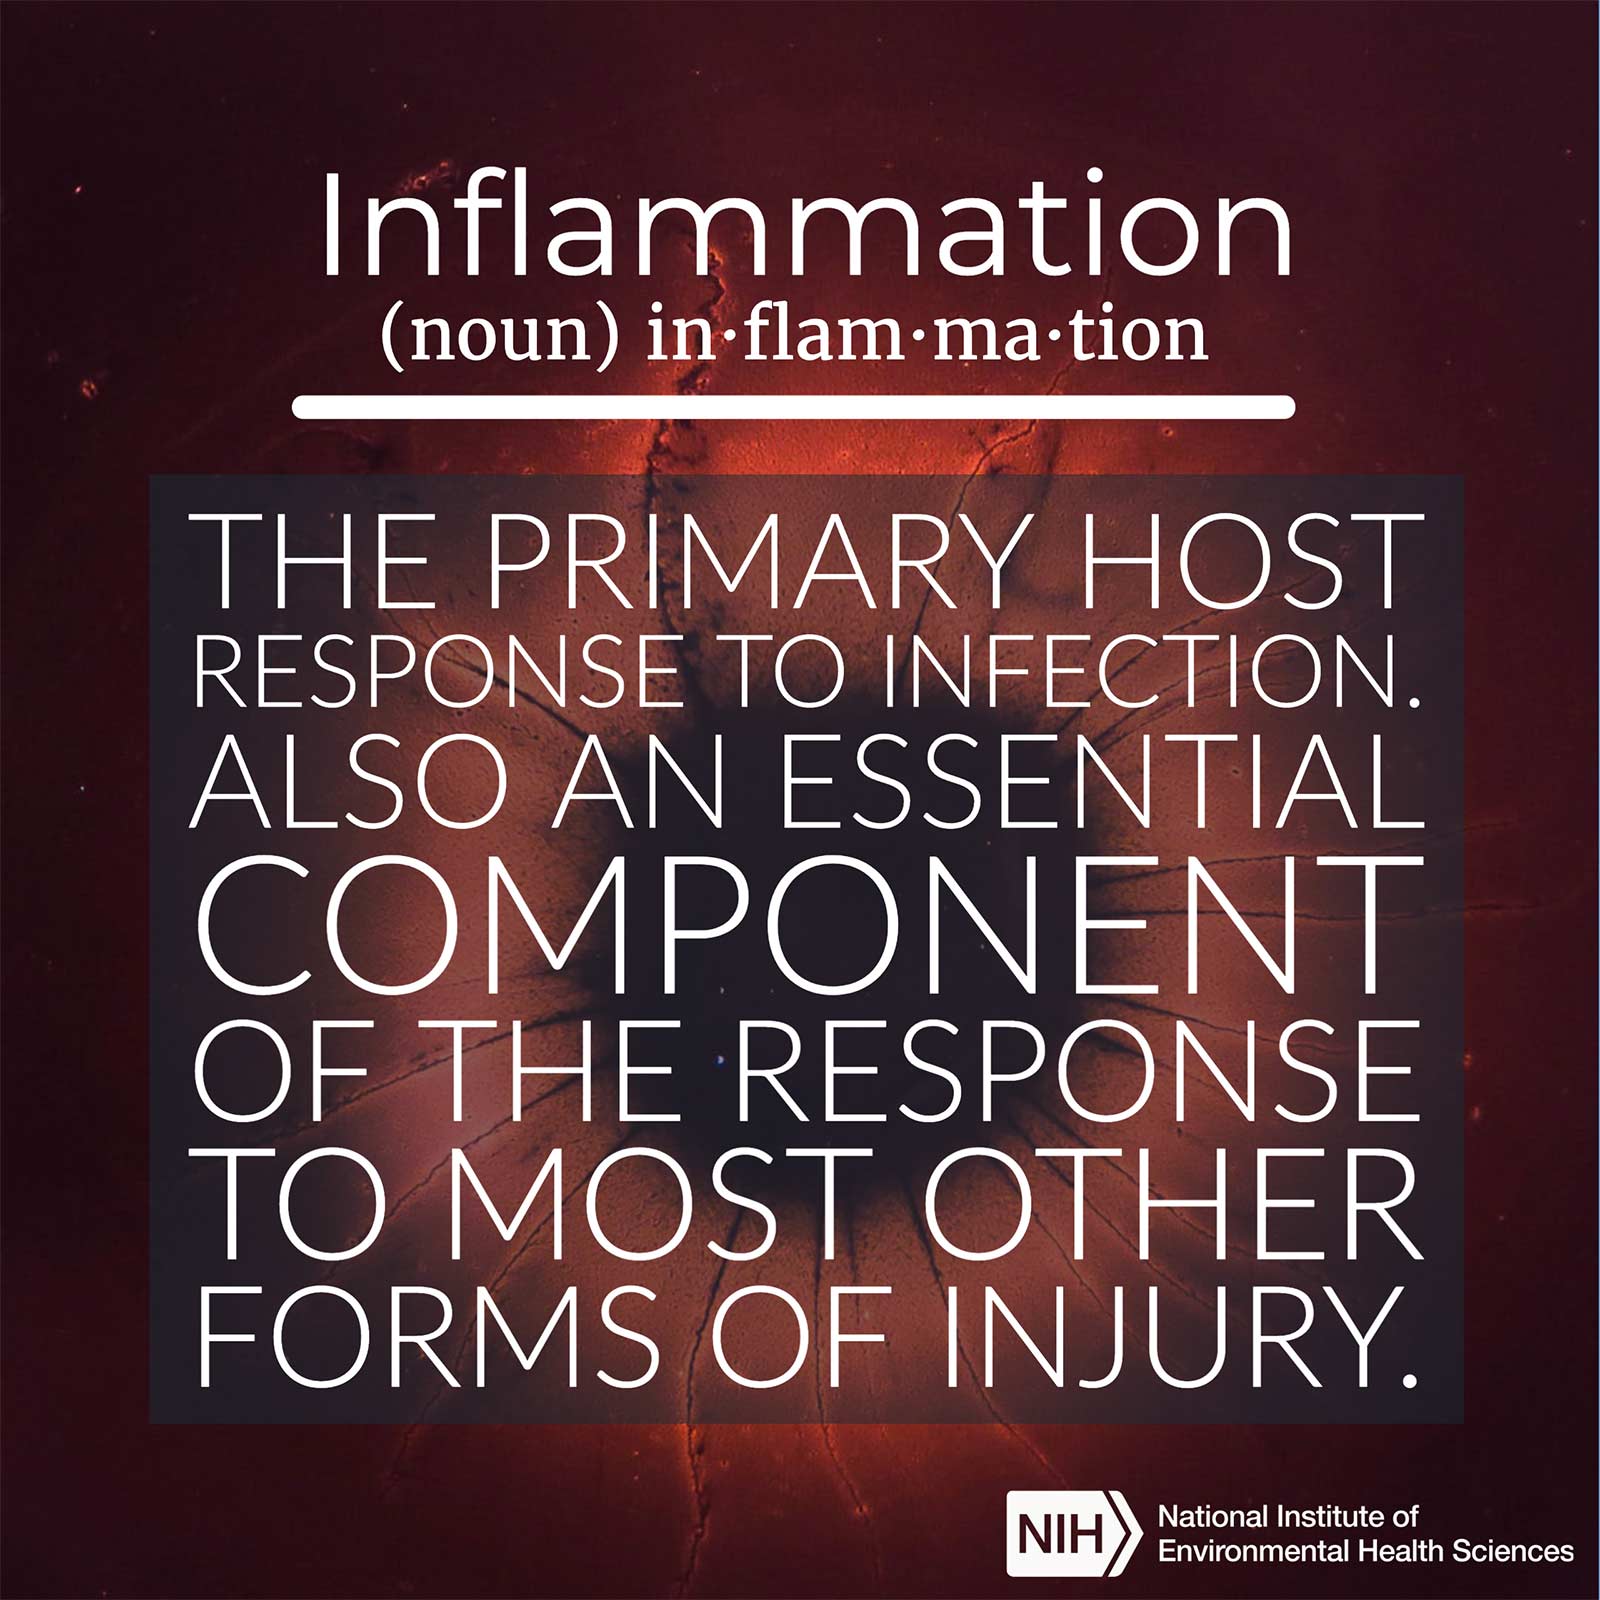 Inflammation (noun) defined as &#39;the primary host repsonse to infection. Also an essential component of the response to most other forms of injury.&#39;